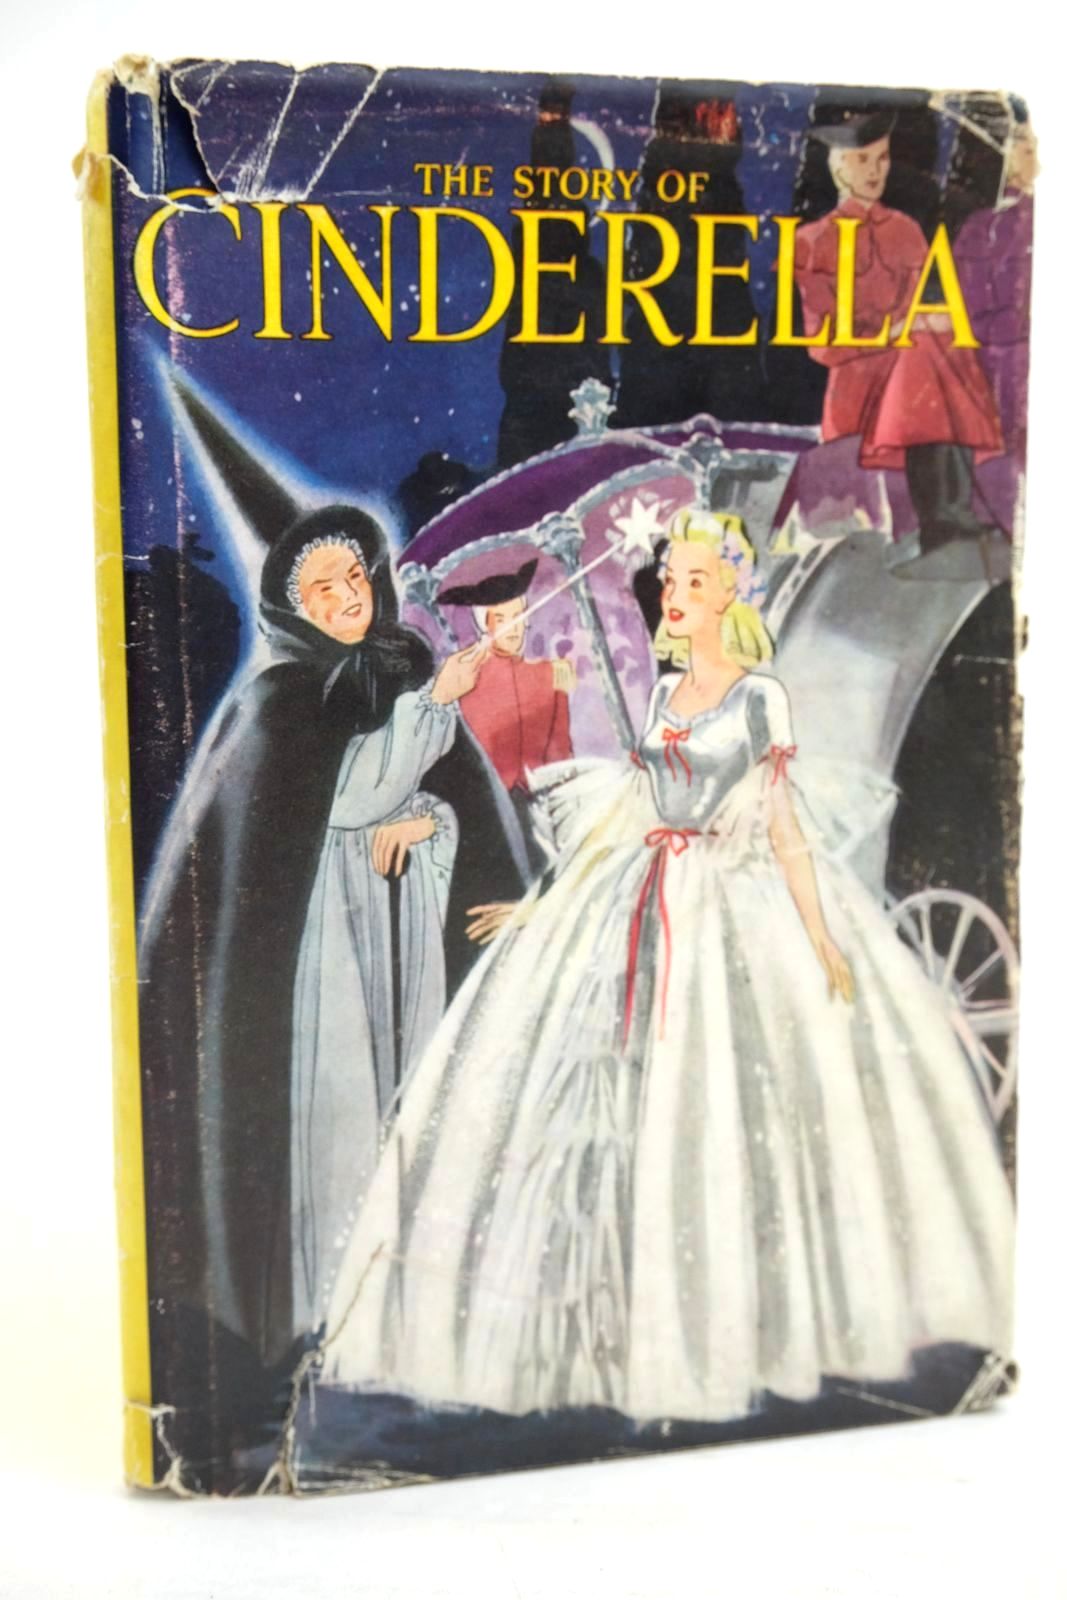 Photo of THE STORY OF CINDERELLA written by Levy, Muriel illustrated by Bowmar, Evelyn published by Wills &amp; Hepworth Ltd. (STOCK CODE: 1320093)  for sale by Stella & Rose's Books